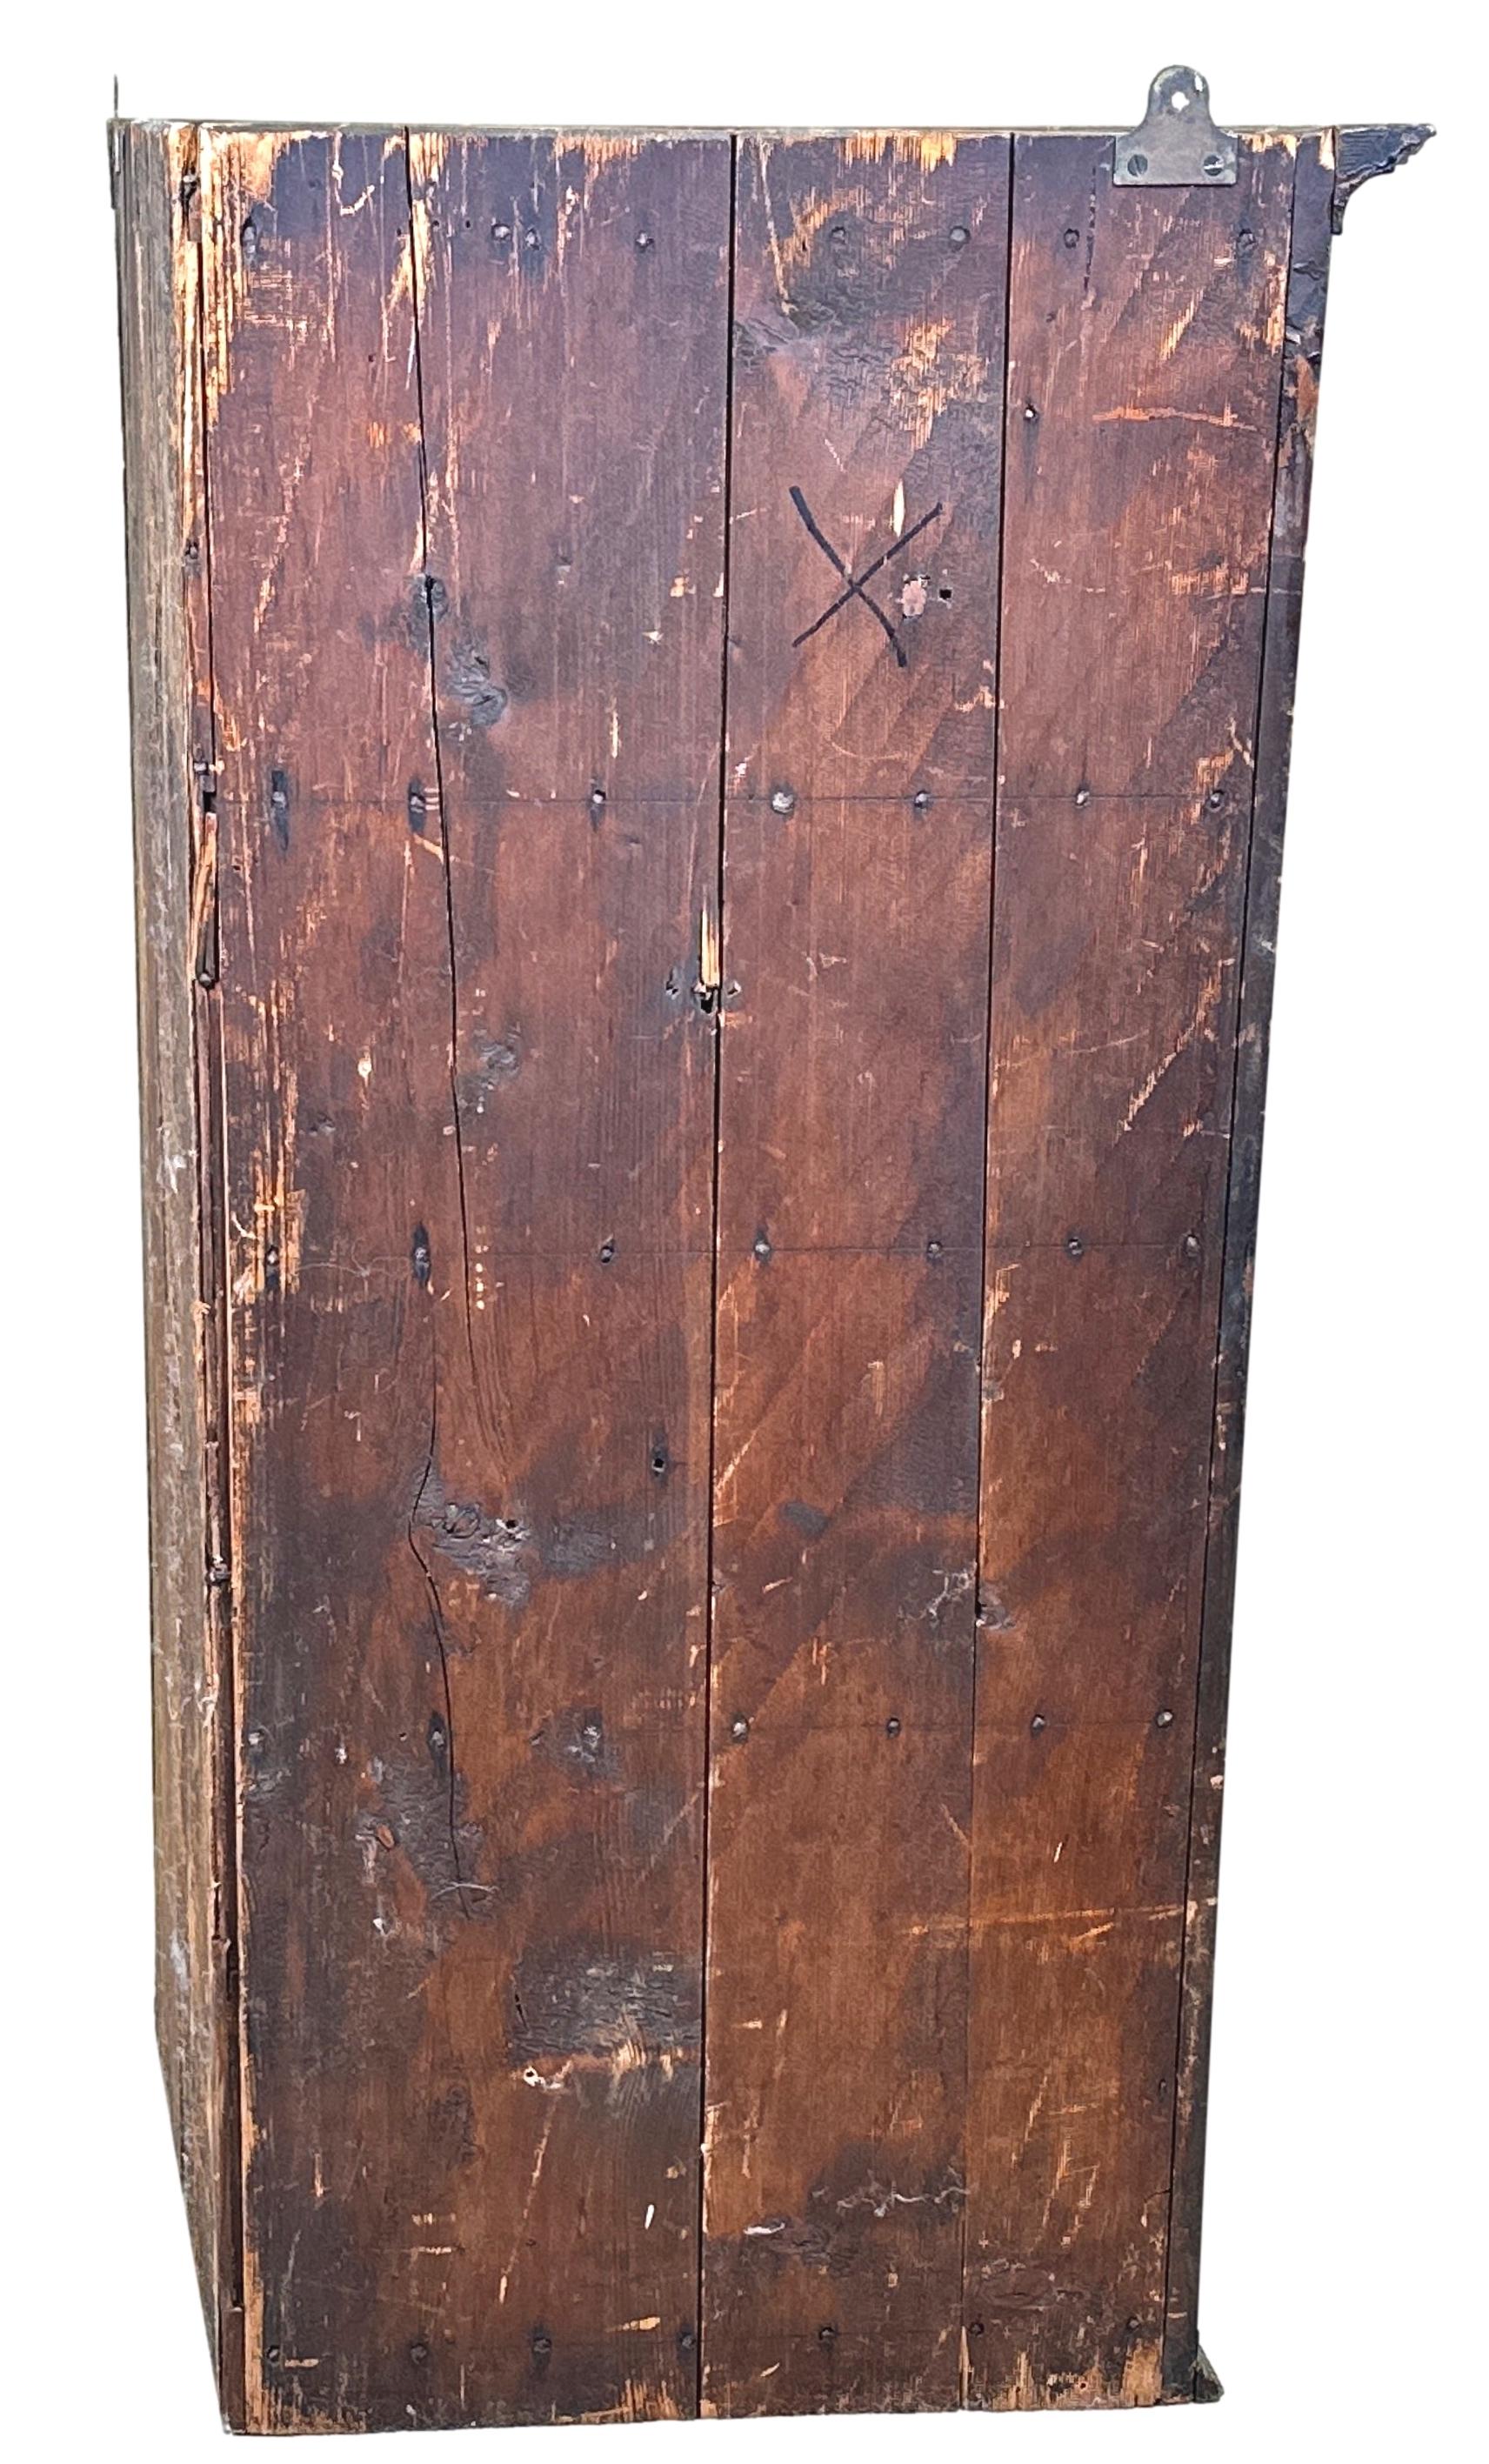 Georgian Mahogany Corner Cabinet In Good Condition For Sale In Bedfordshire, GB